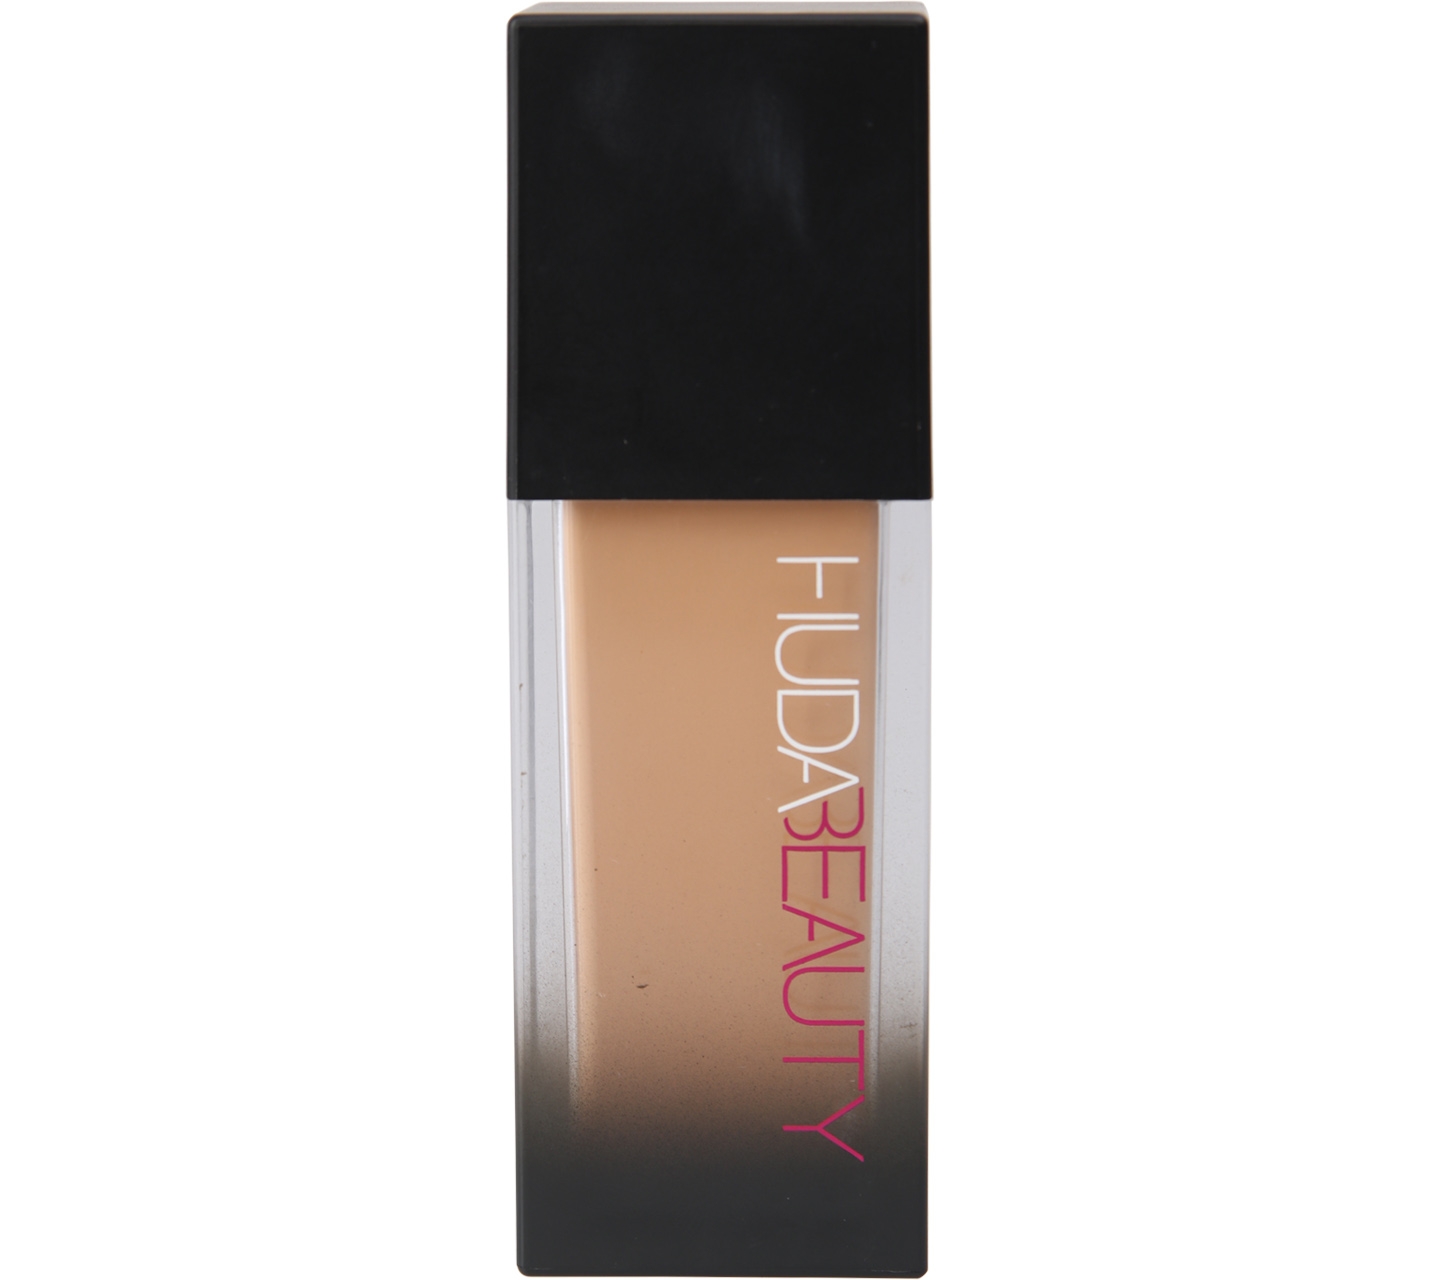 Huda Beauty Toasted Coconut High Coverage Foundation Faces